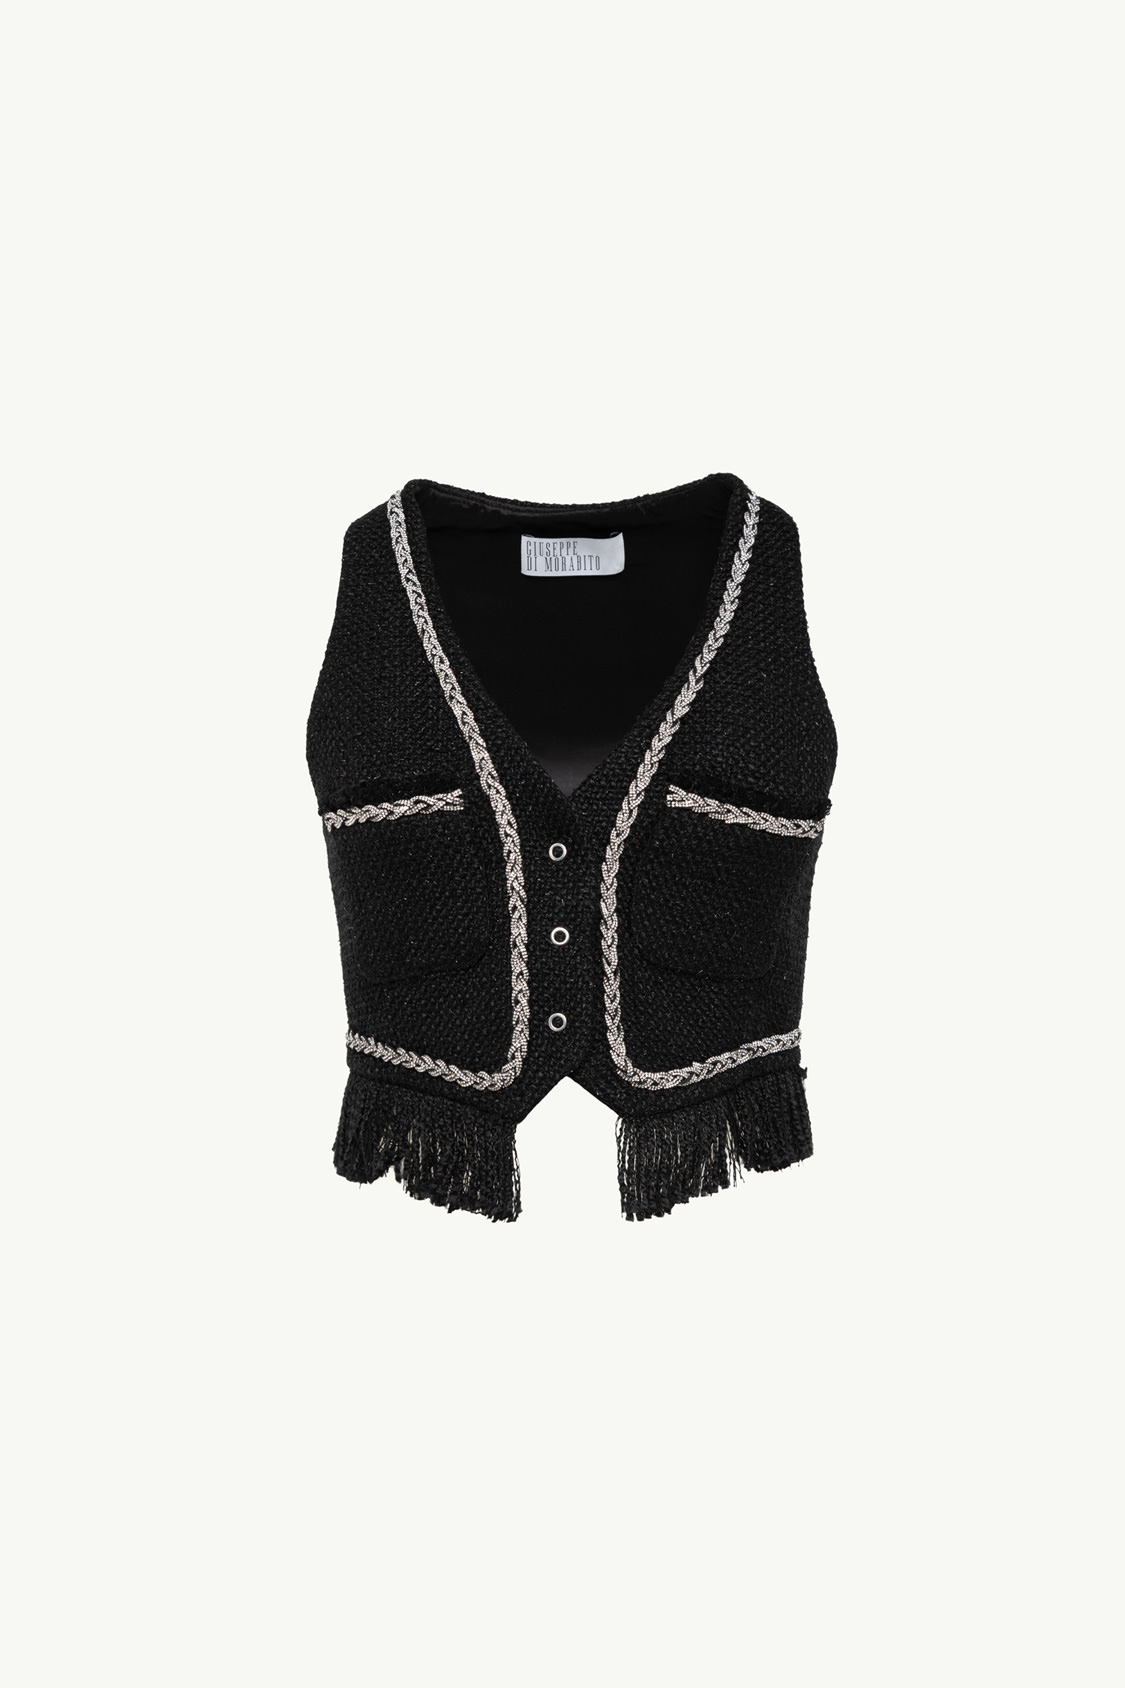 MADE IN ITALY VEST IN BOUCLÉ FABRIC